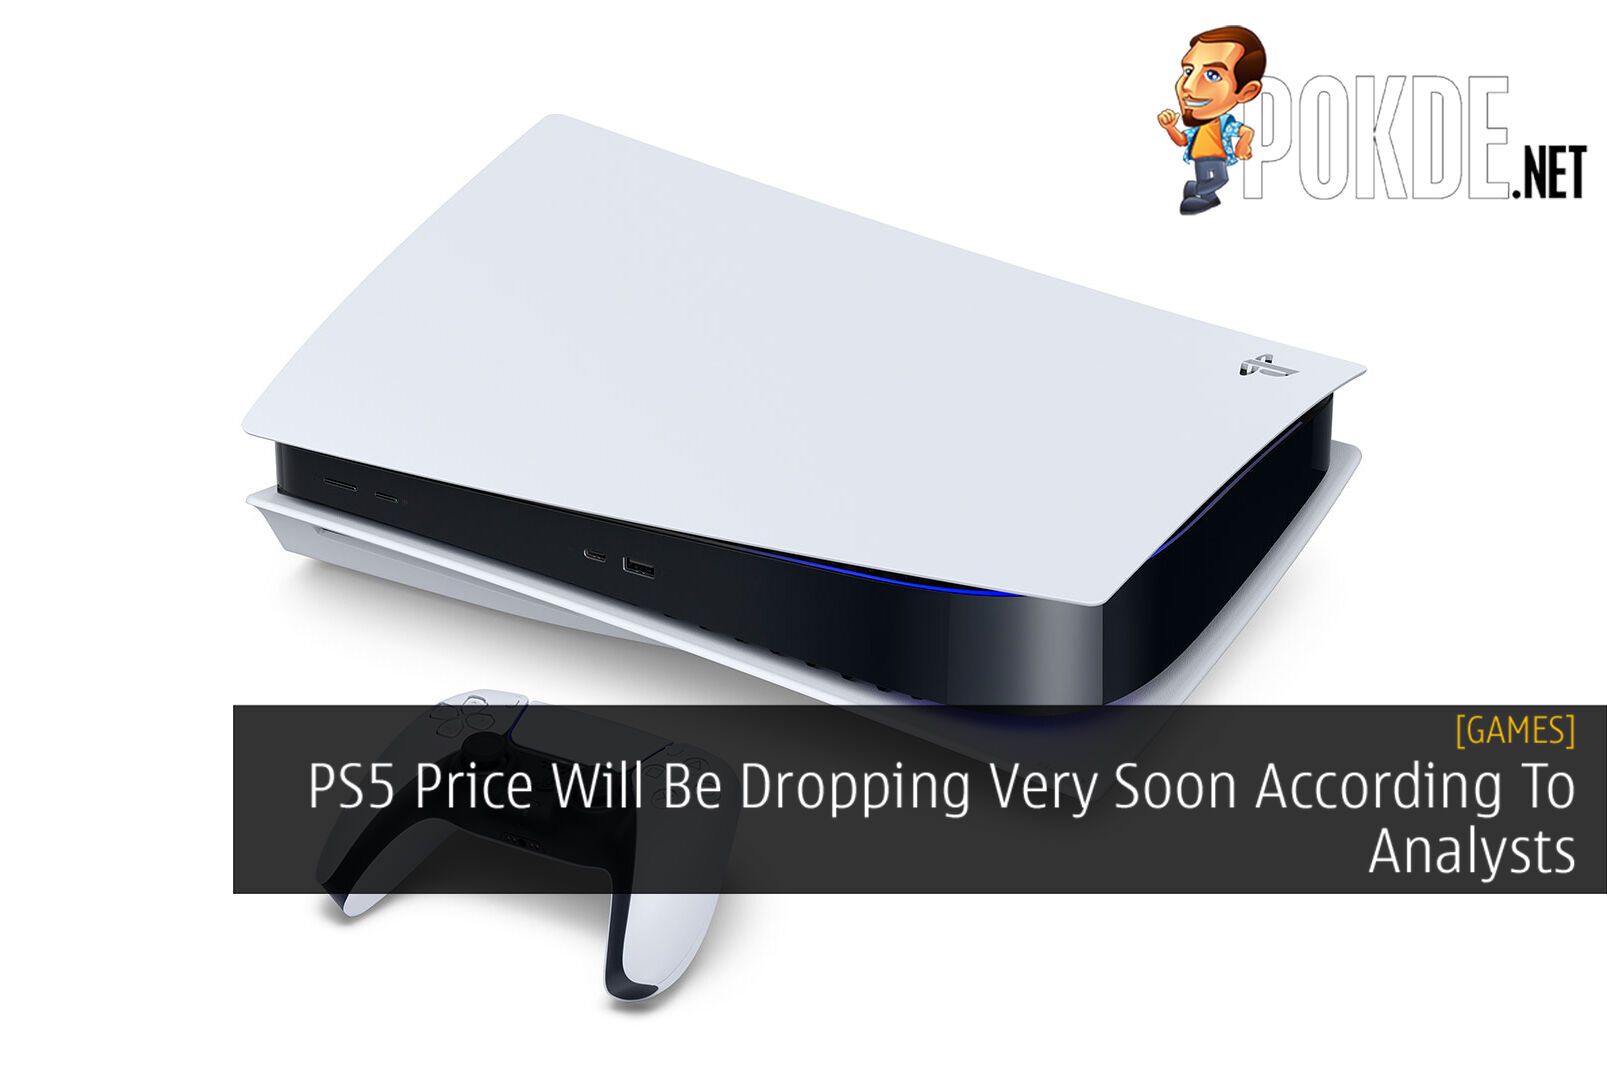 what will be the price for the ps5